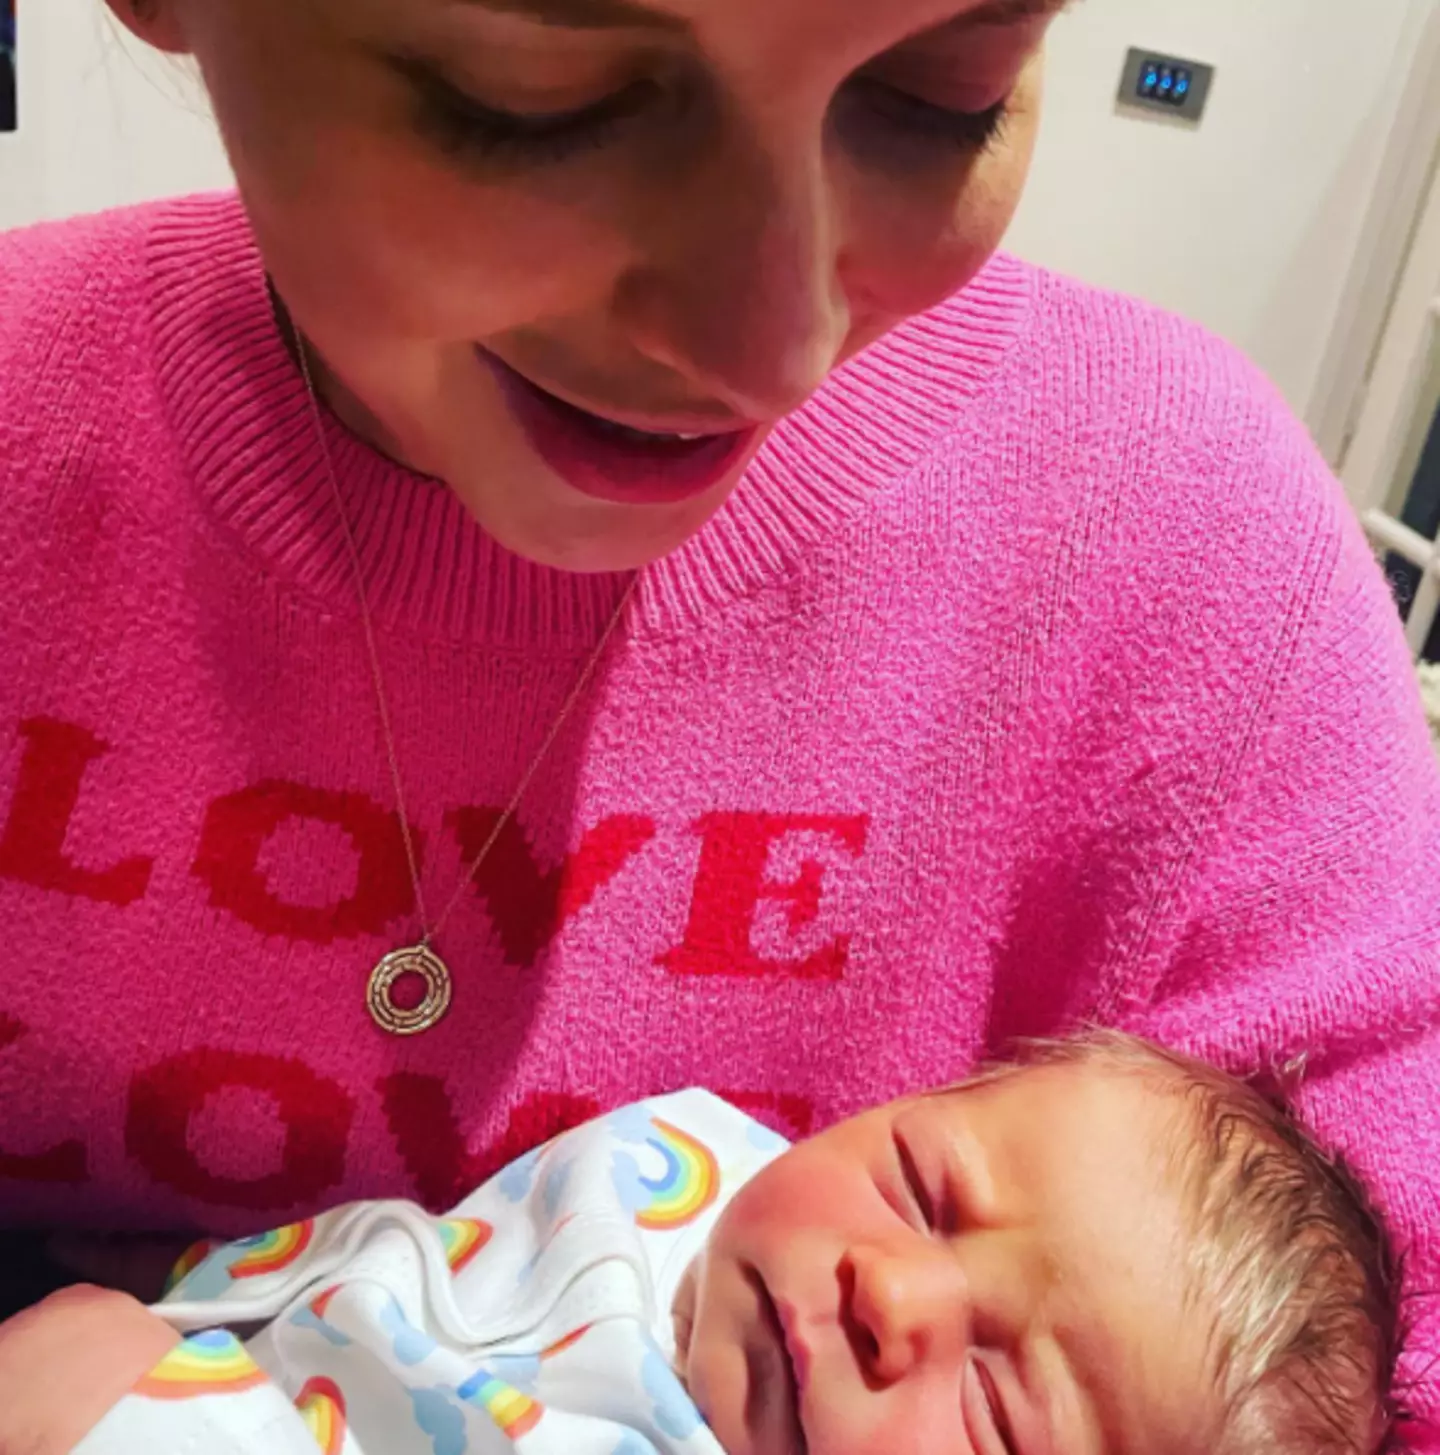 Rachel Riley has given birth to her second daughter. [